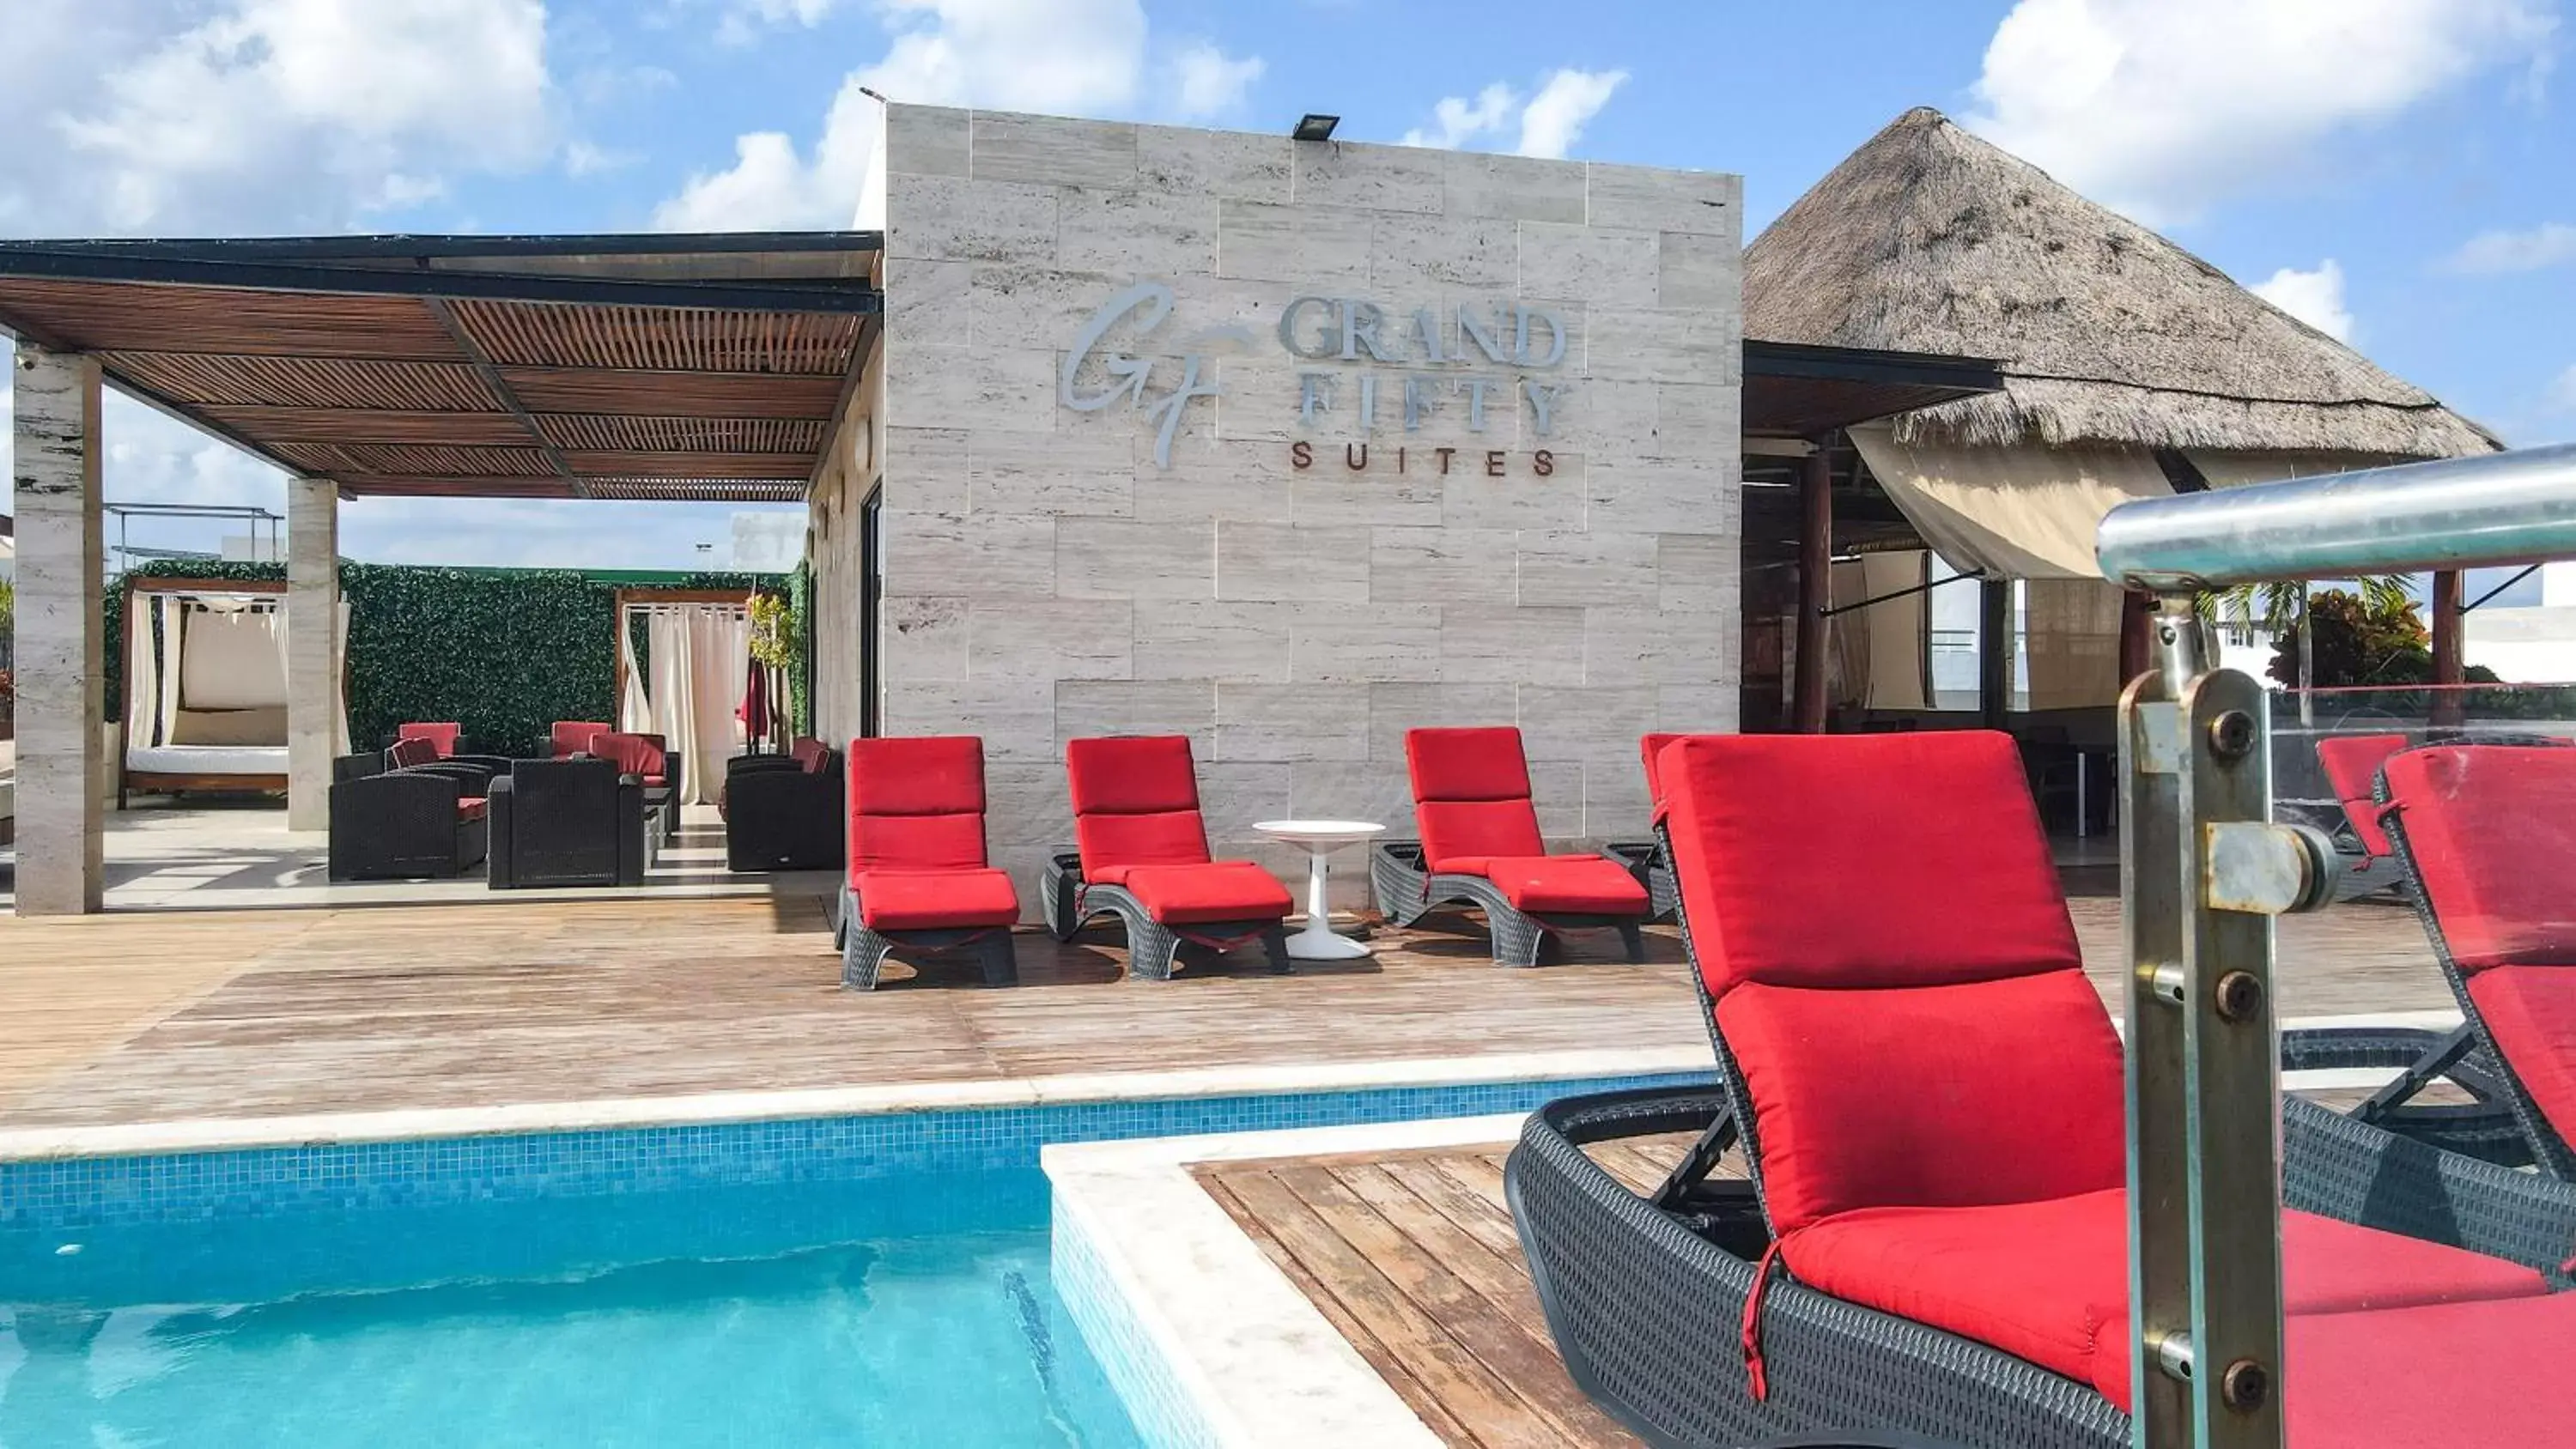 Swimming pool, Property Building in Grand Fifty Suites